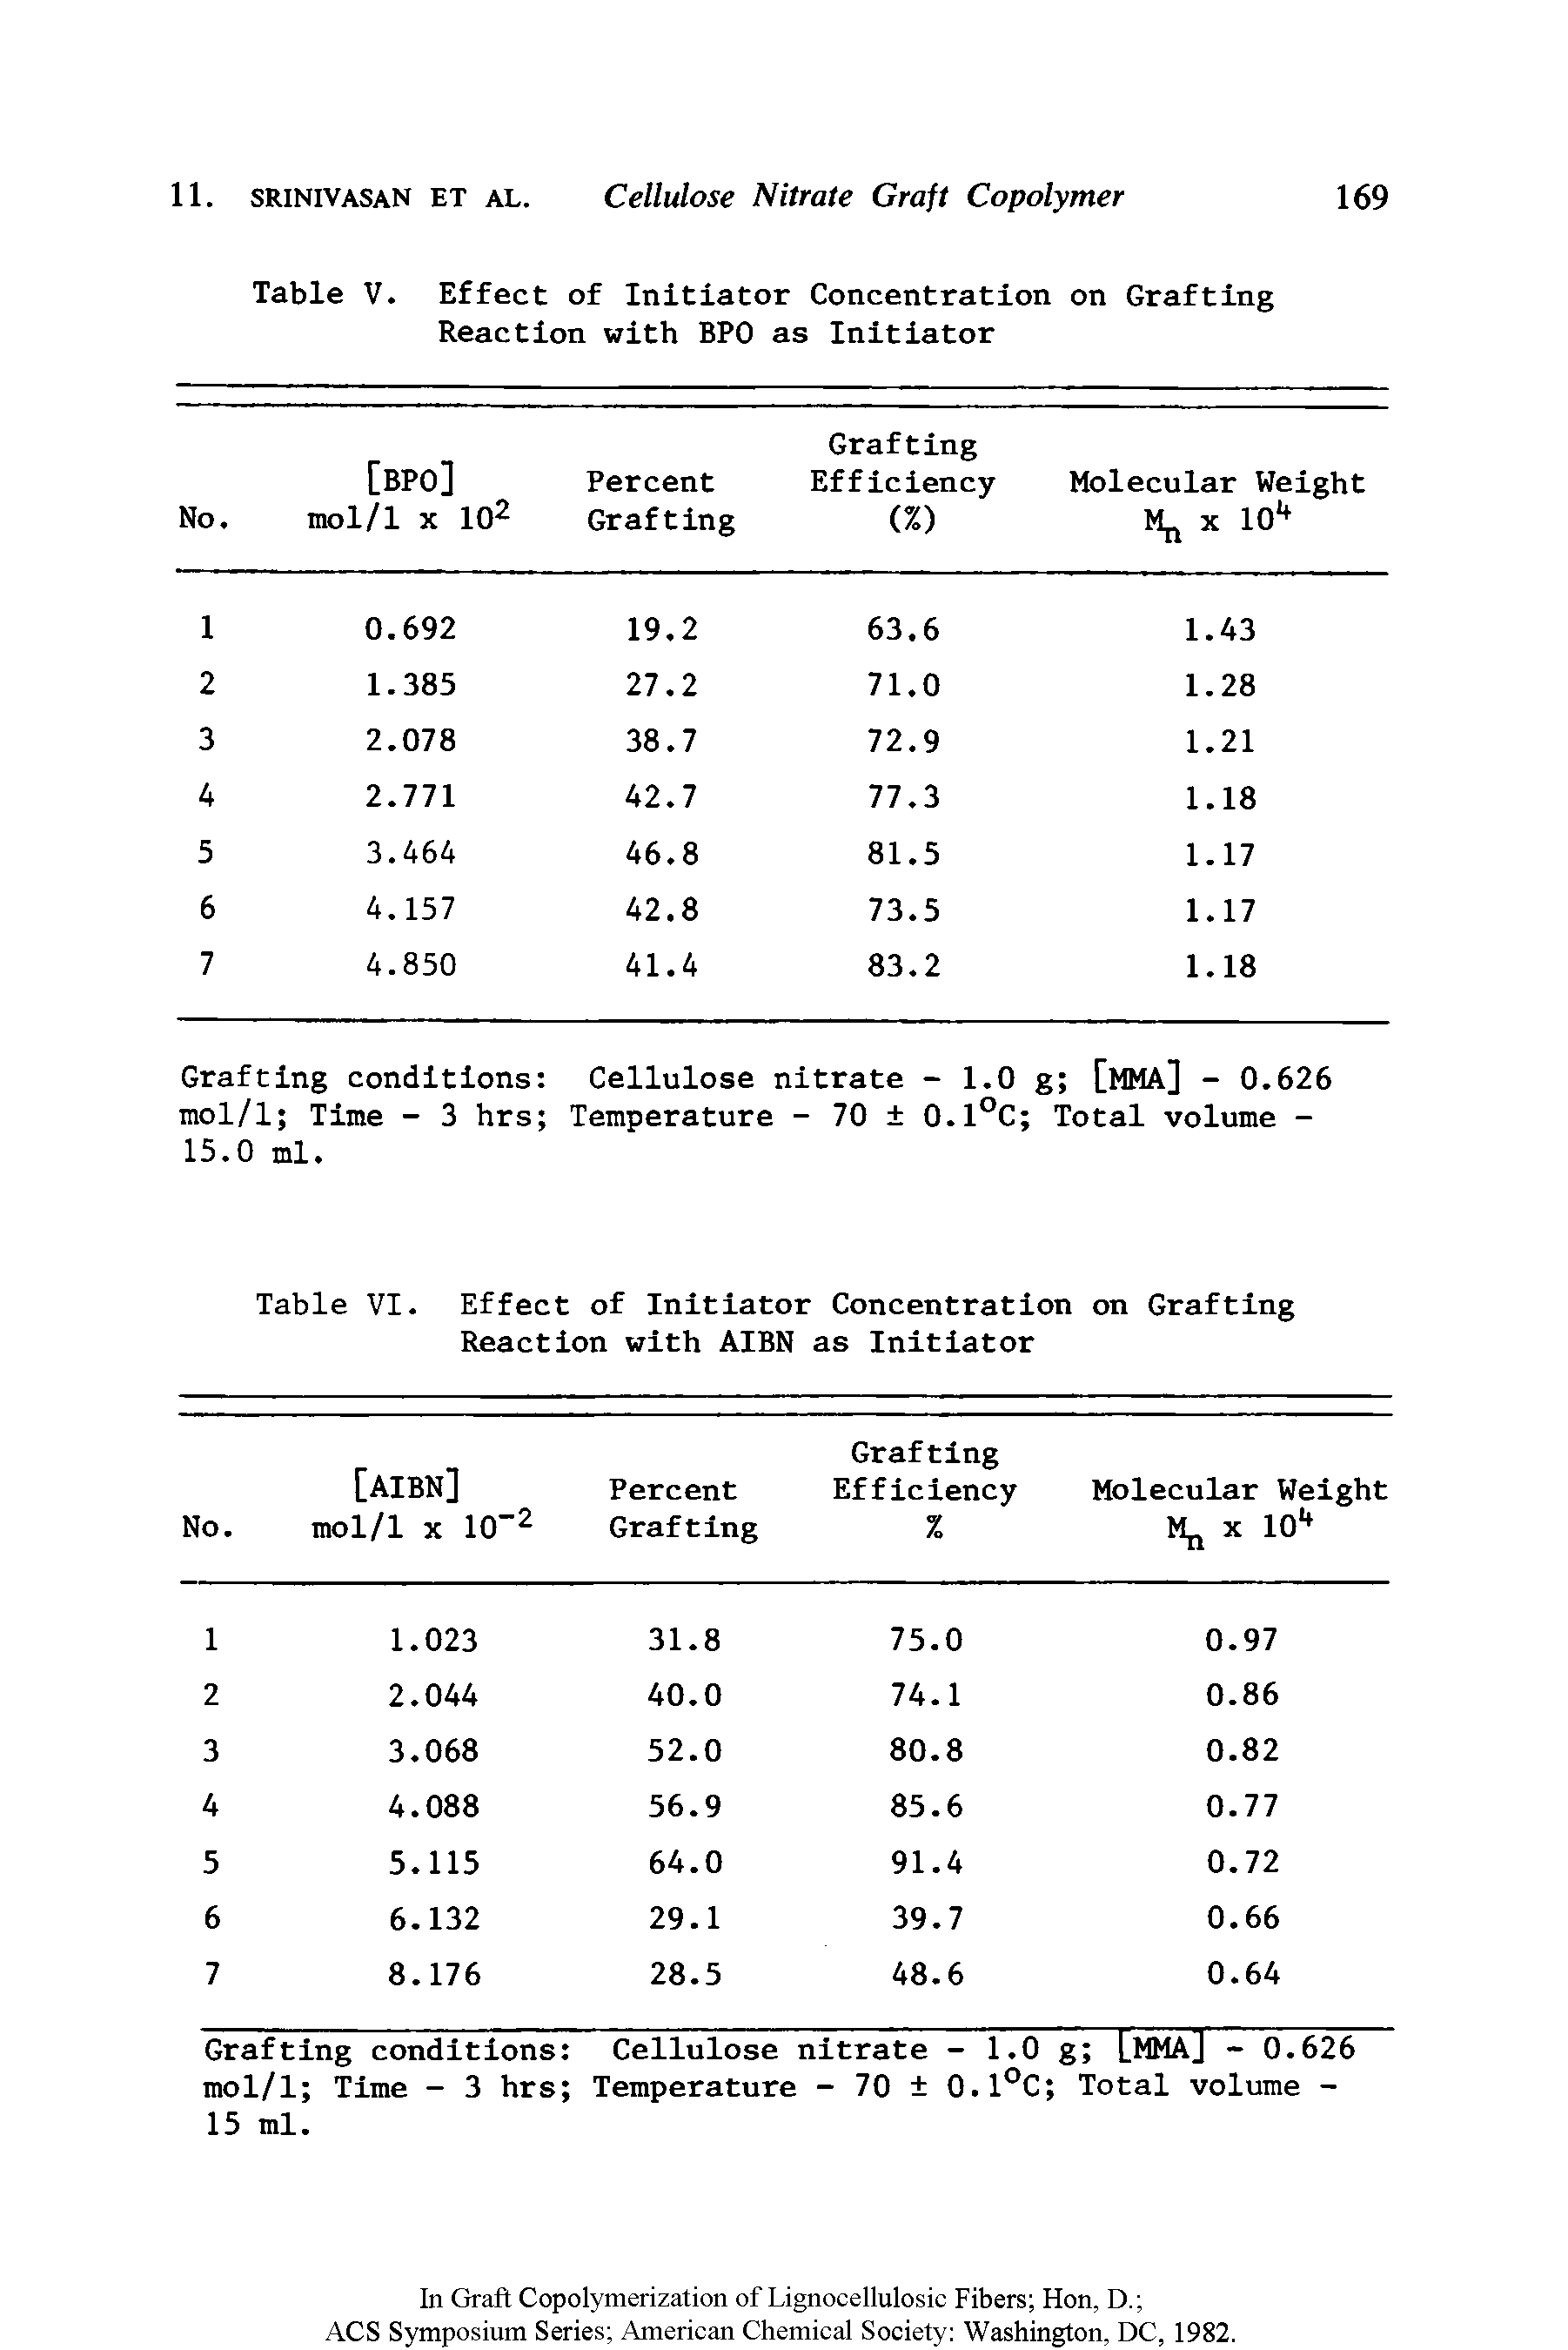 Table V. Effect of Initiator Concentration on Grafting Reaction with BPO as Initiator...